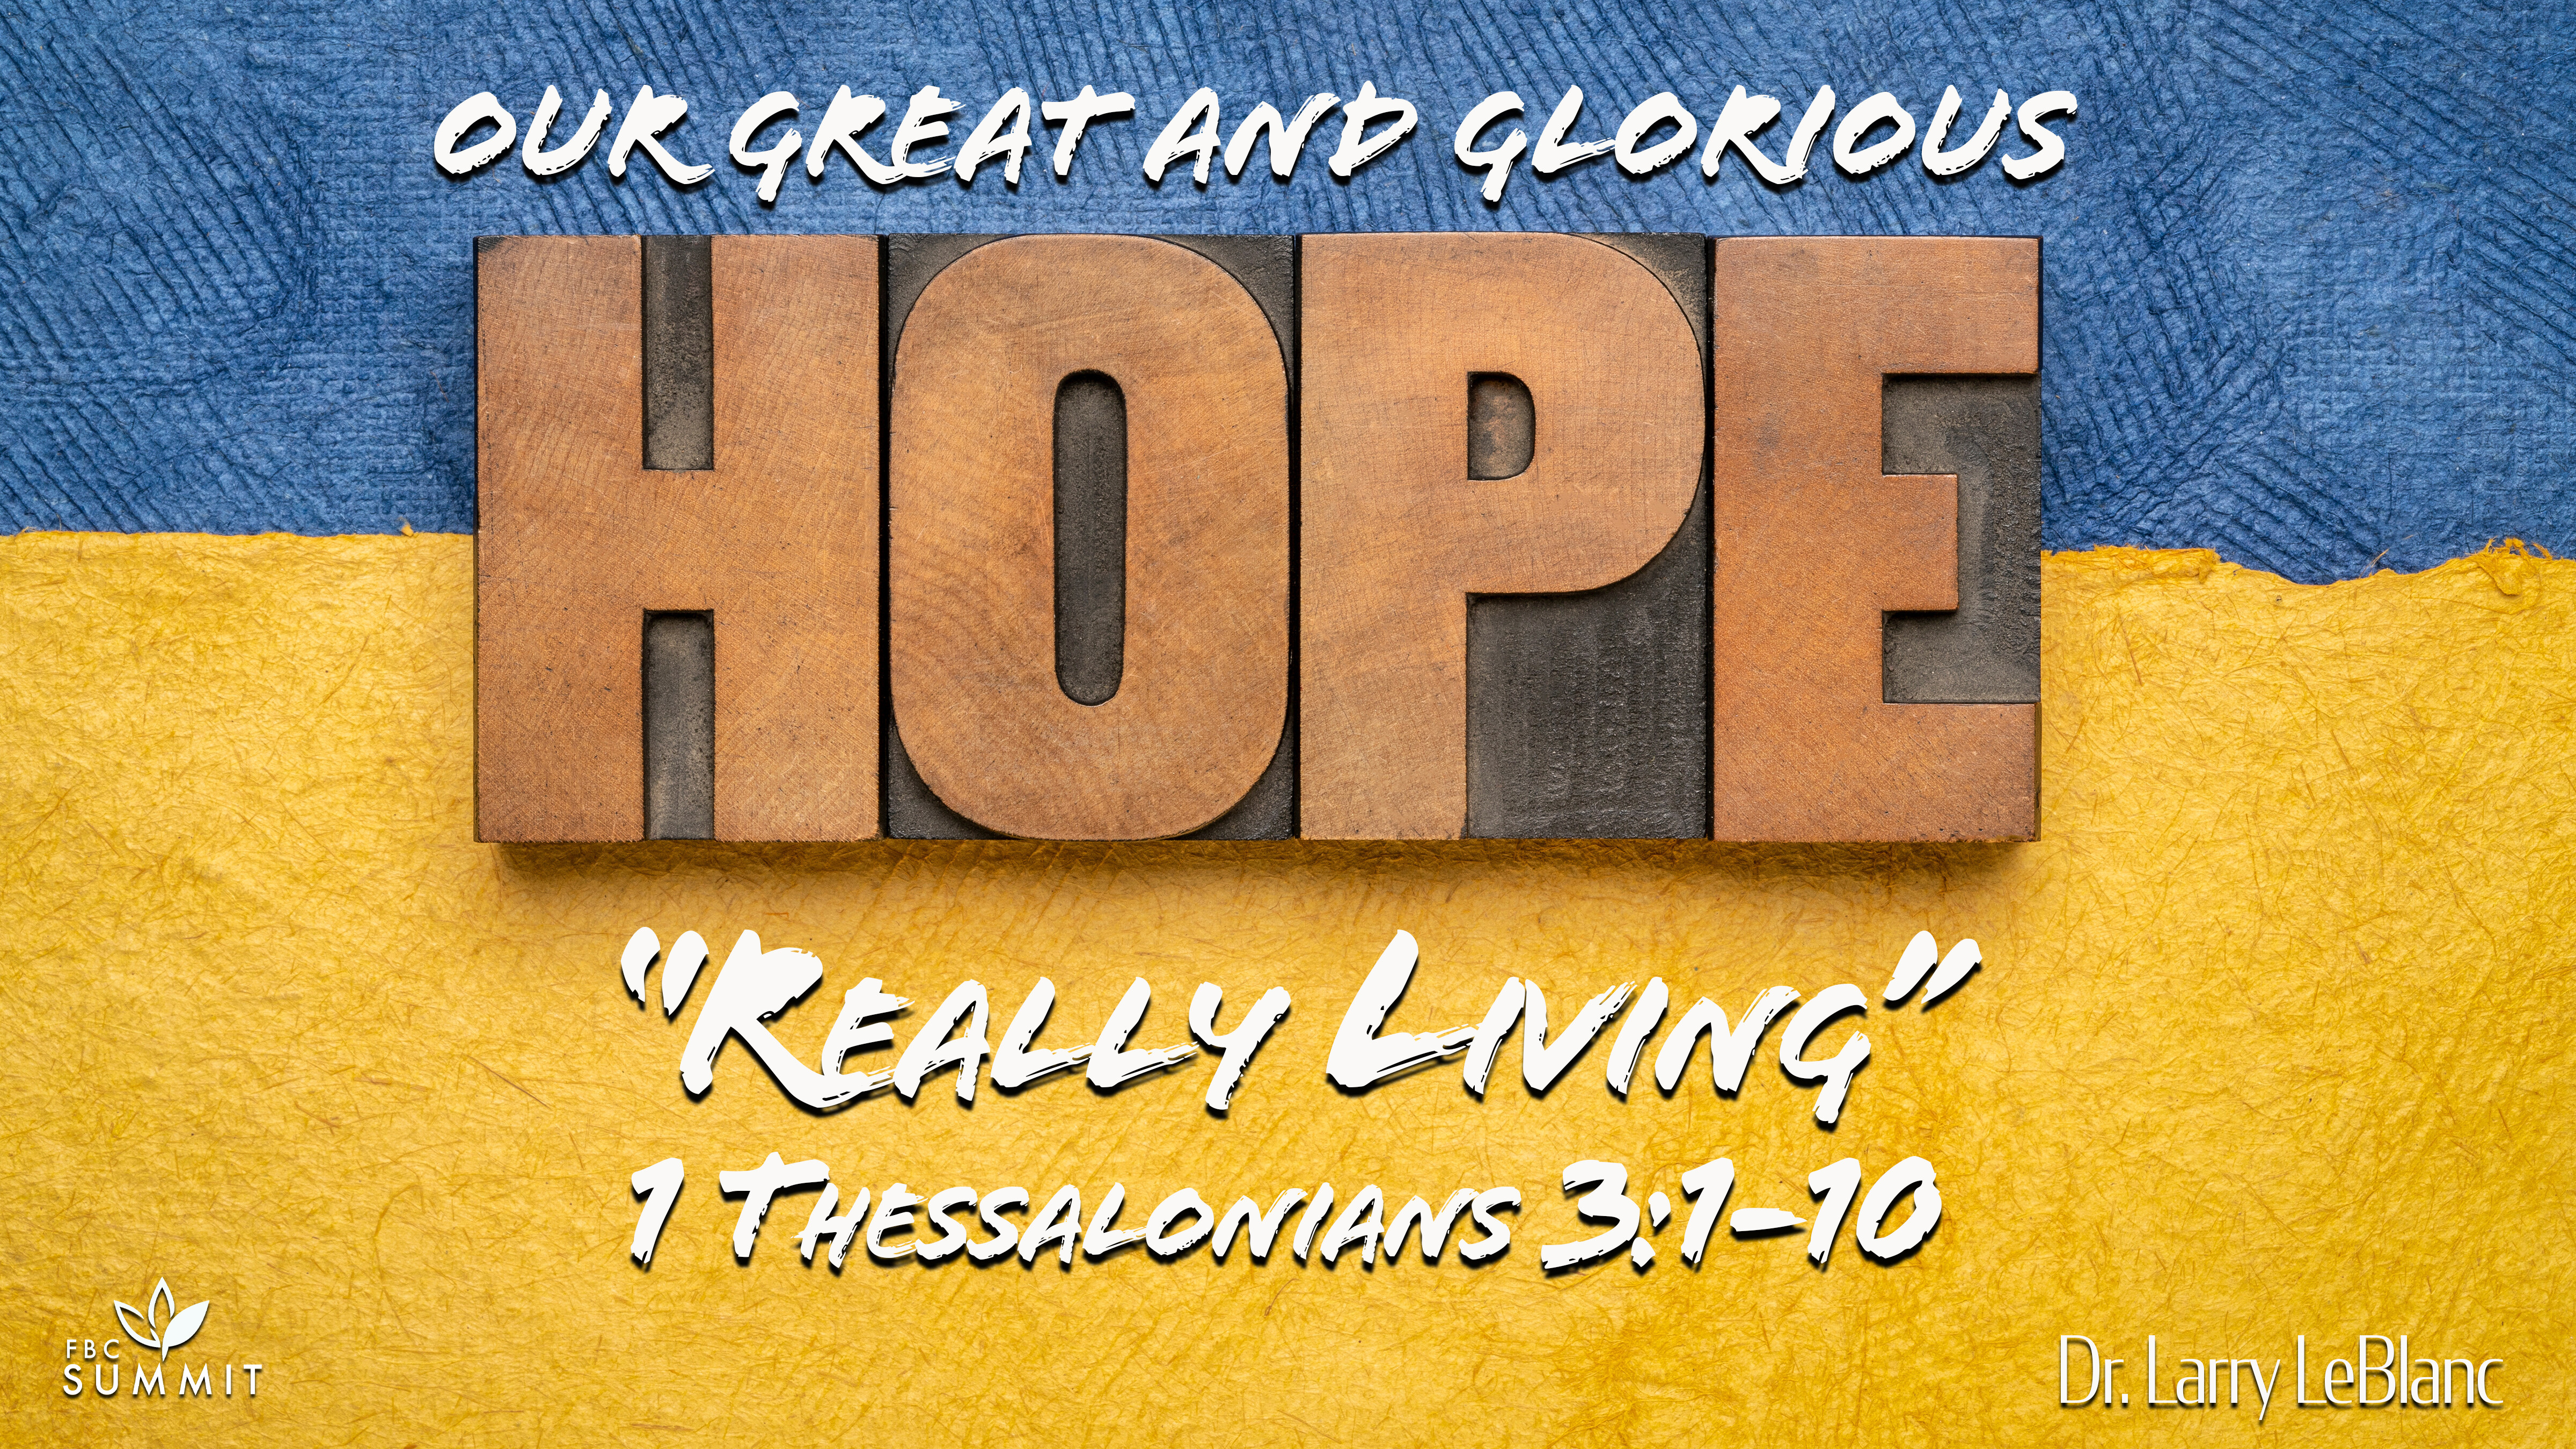 "Really Living" 1 Thessalonians 3:1-10 // Dr. Larry LeBlanc